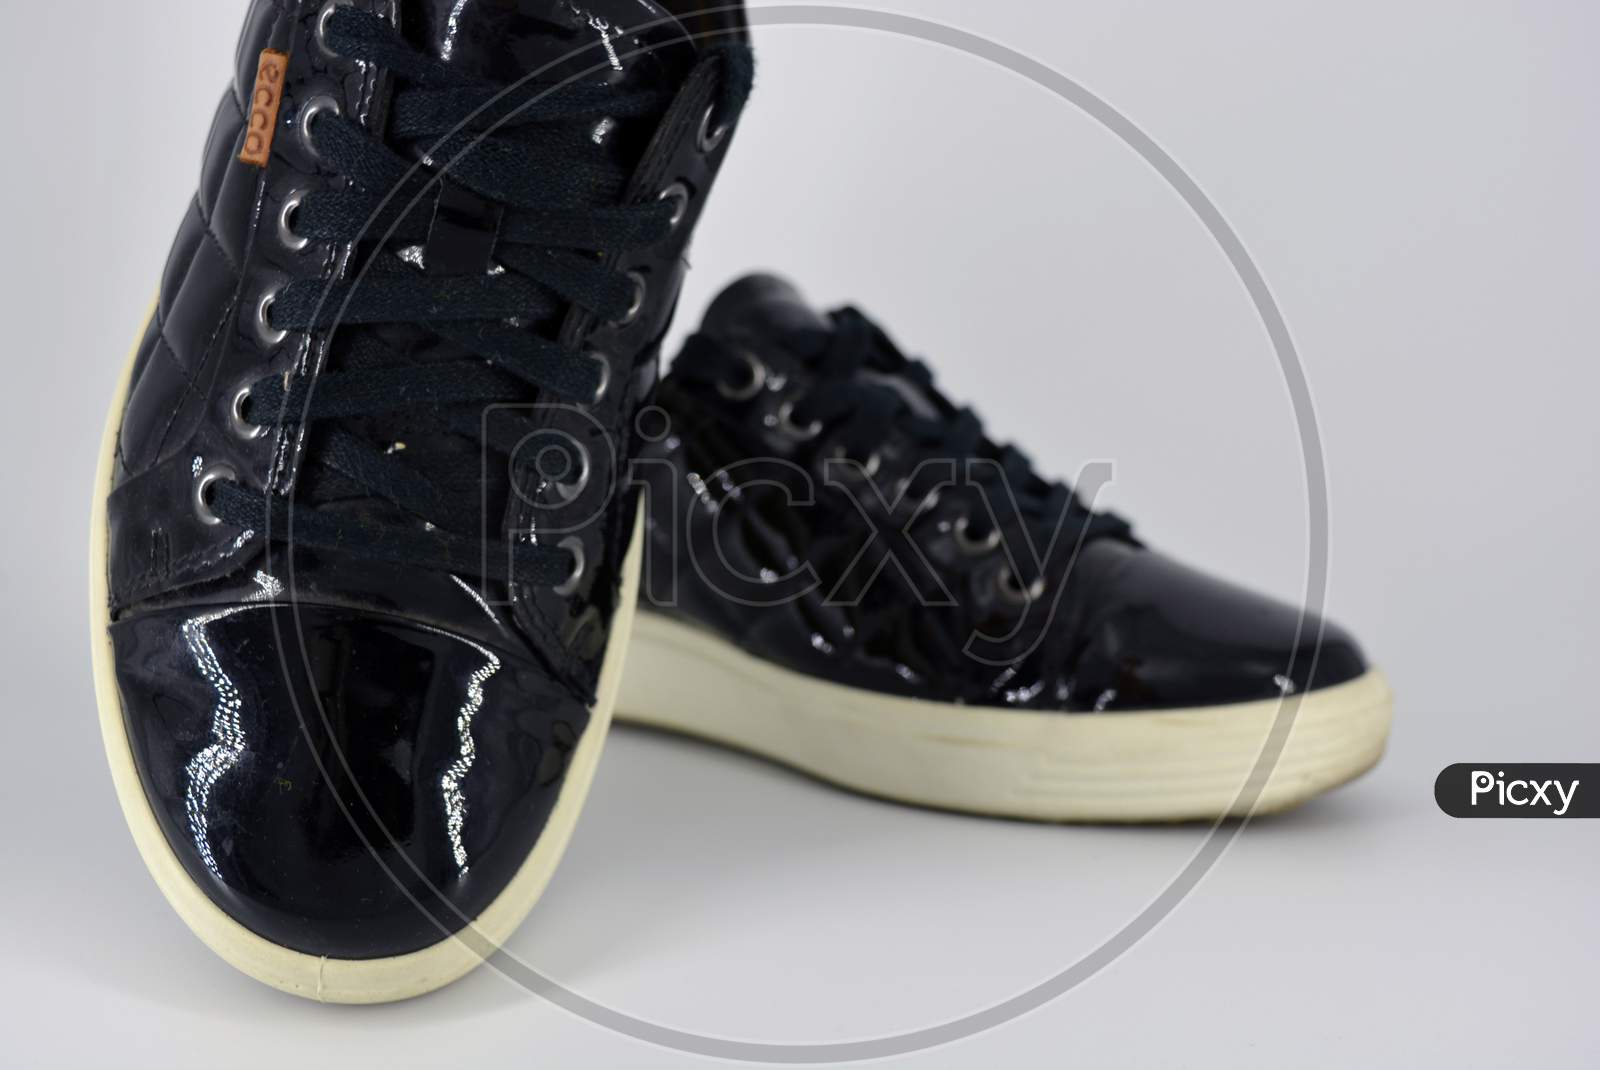 Stylish bright black lacquer shoes located on a white background. Moccasins made of genuine leather with bullshit and black wide laces. Women's sneakers on a white tast sole.